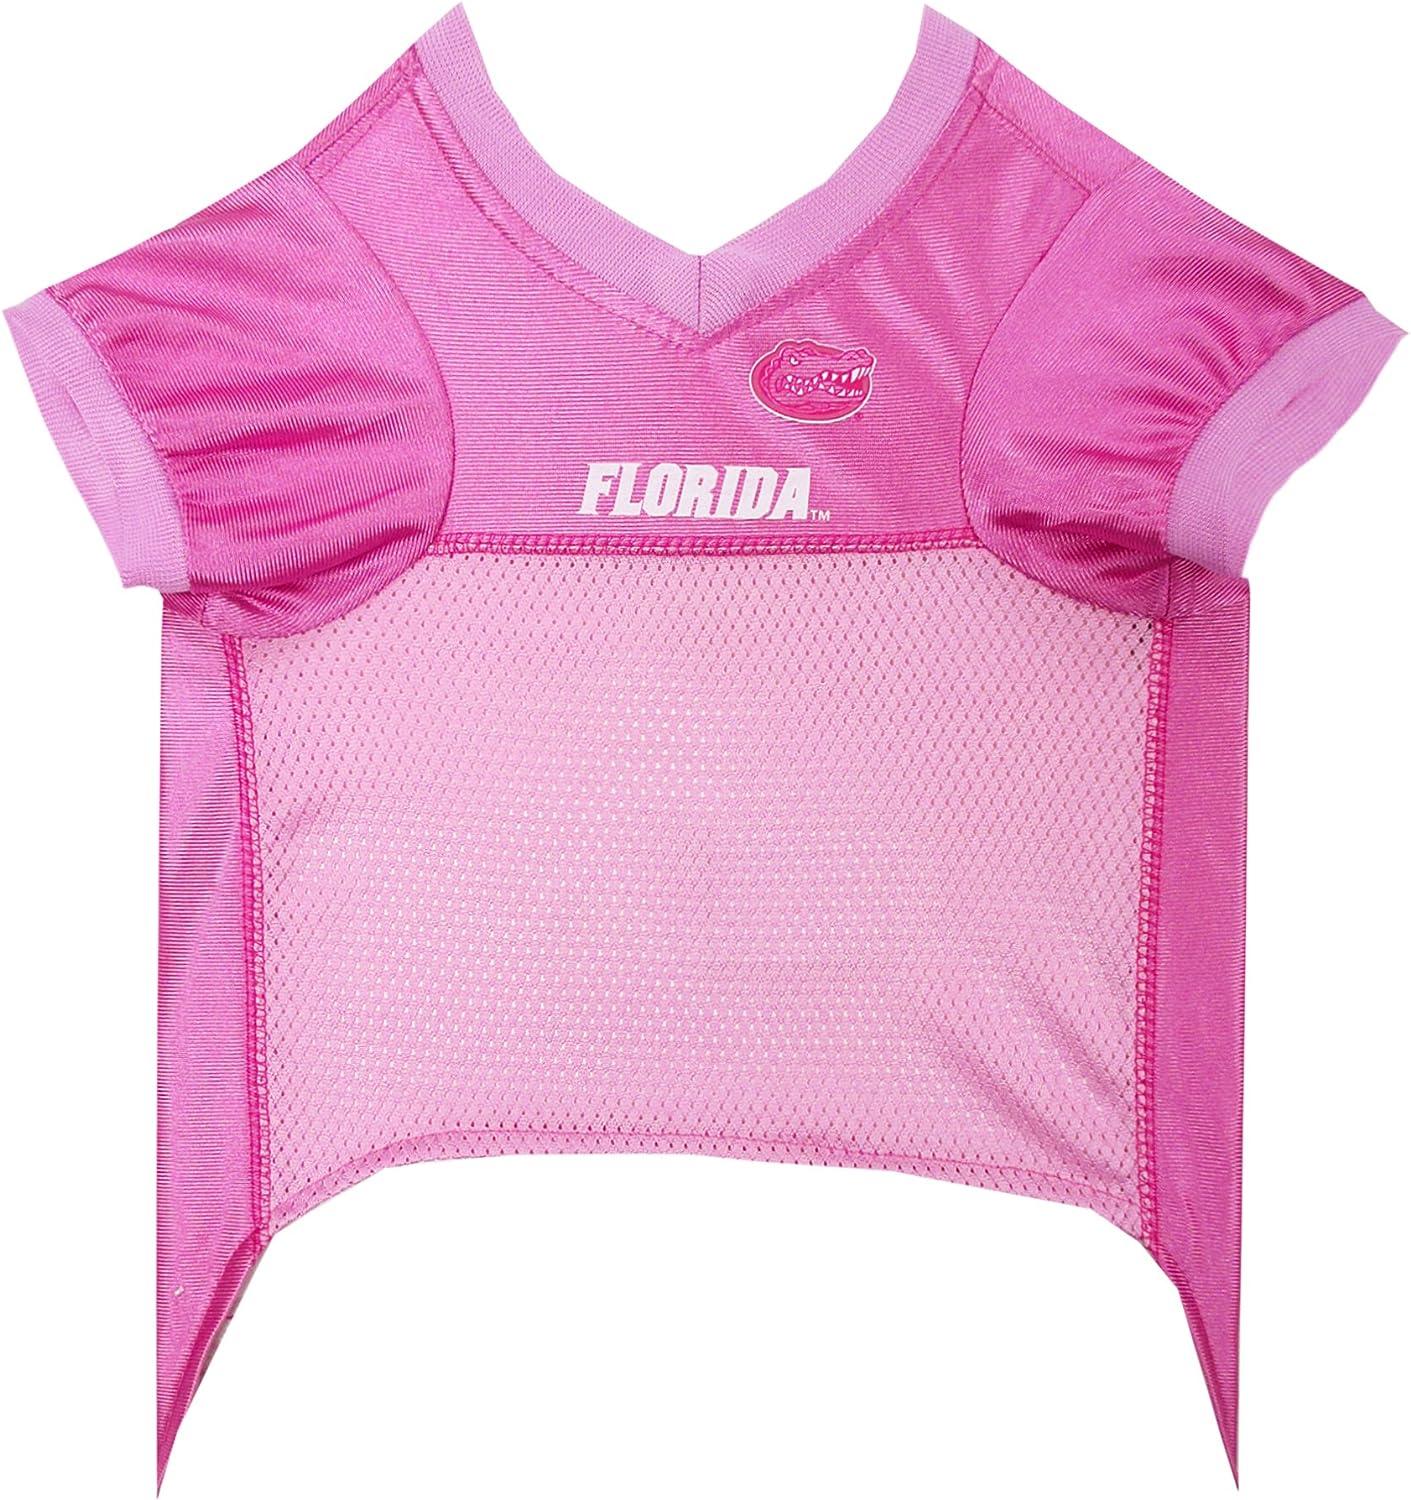 Cleveland Cavaliers Pink Pet Jersey - X-Small 